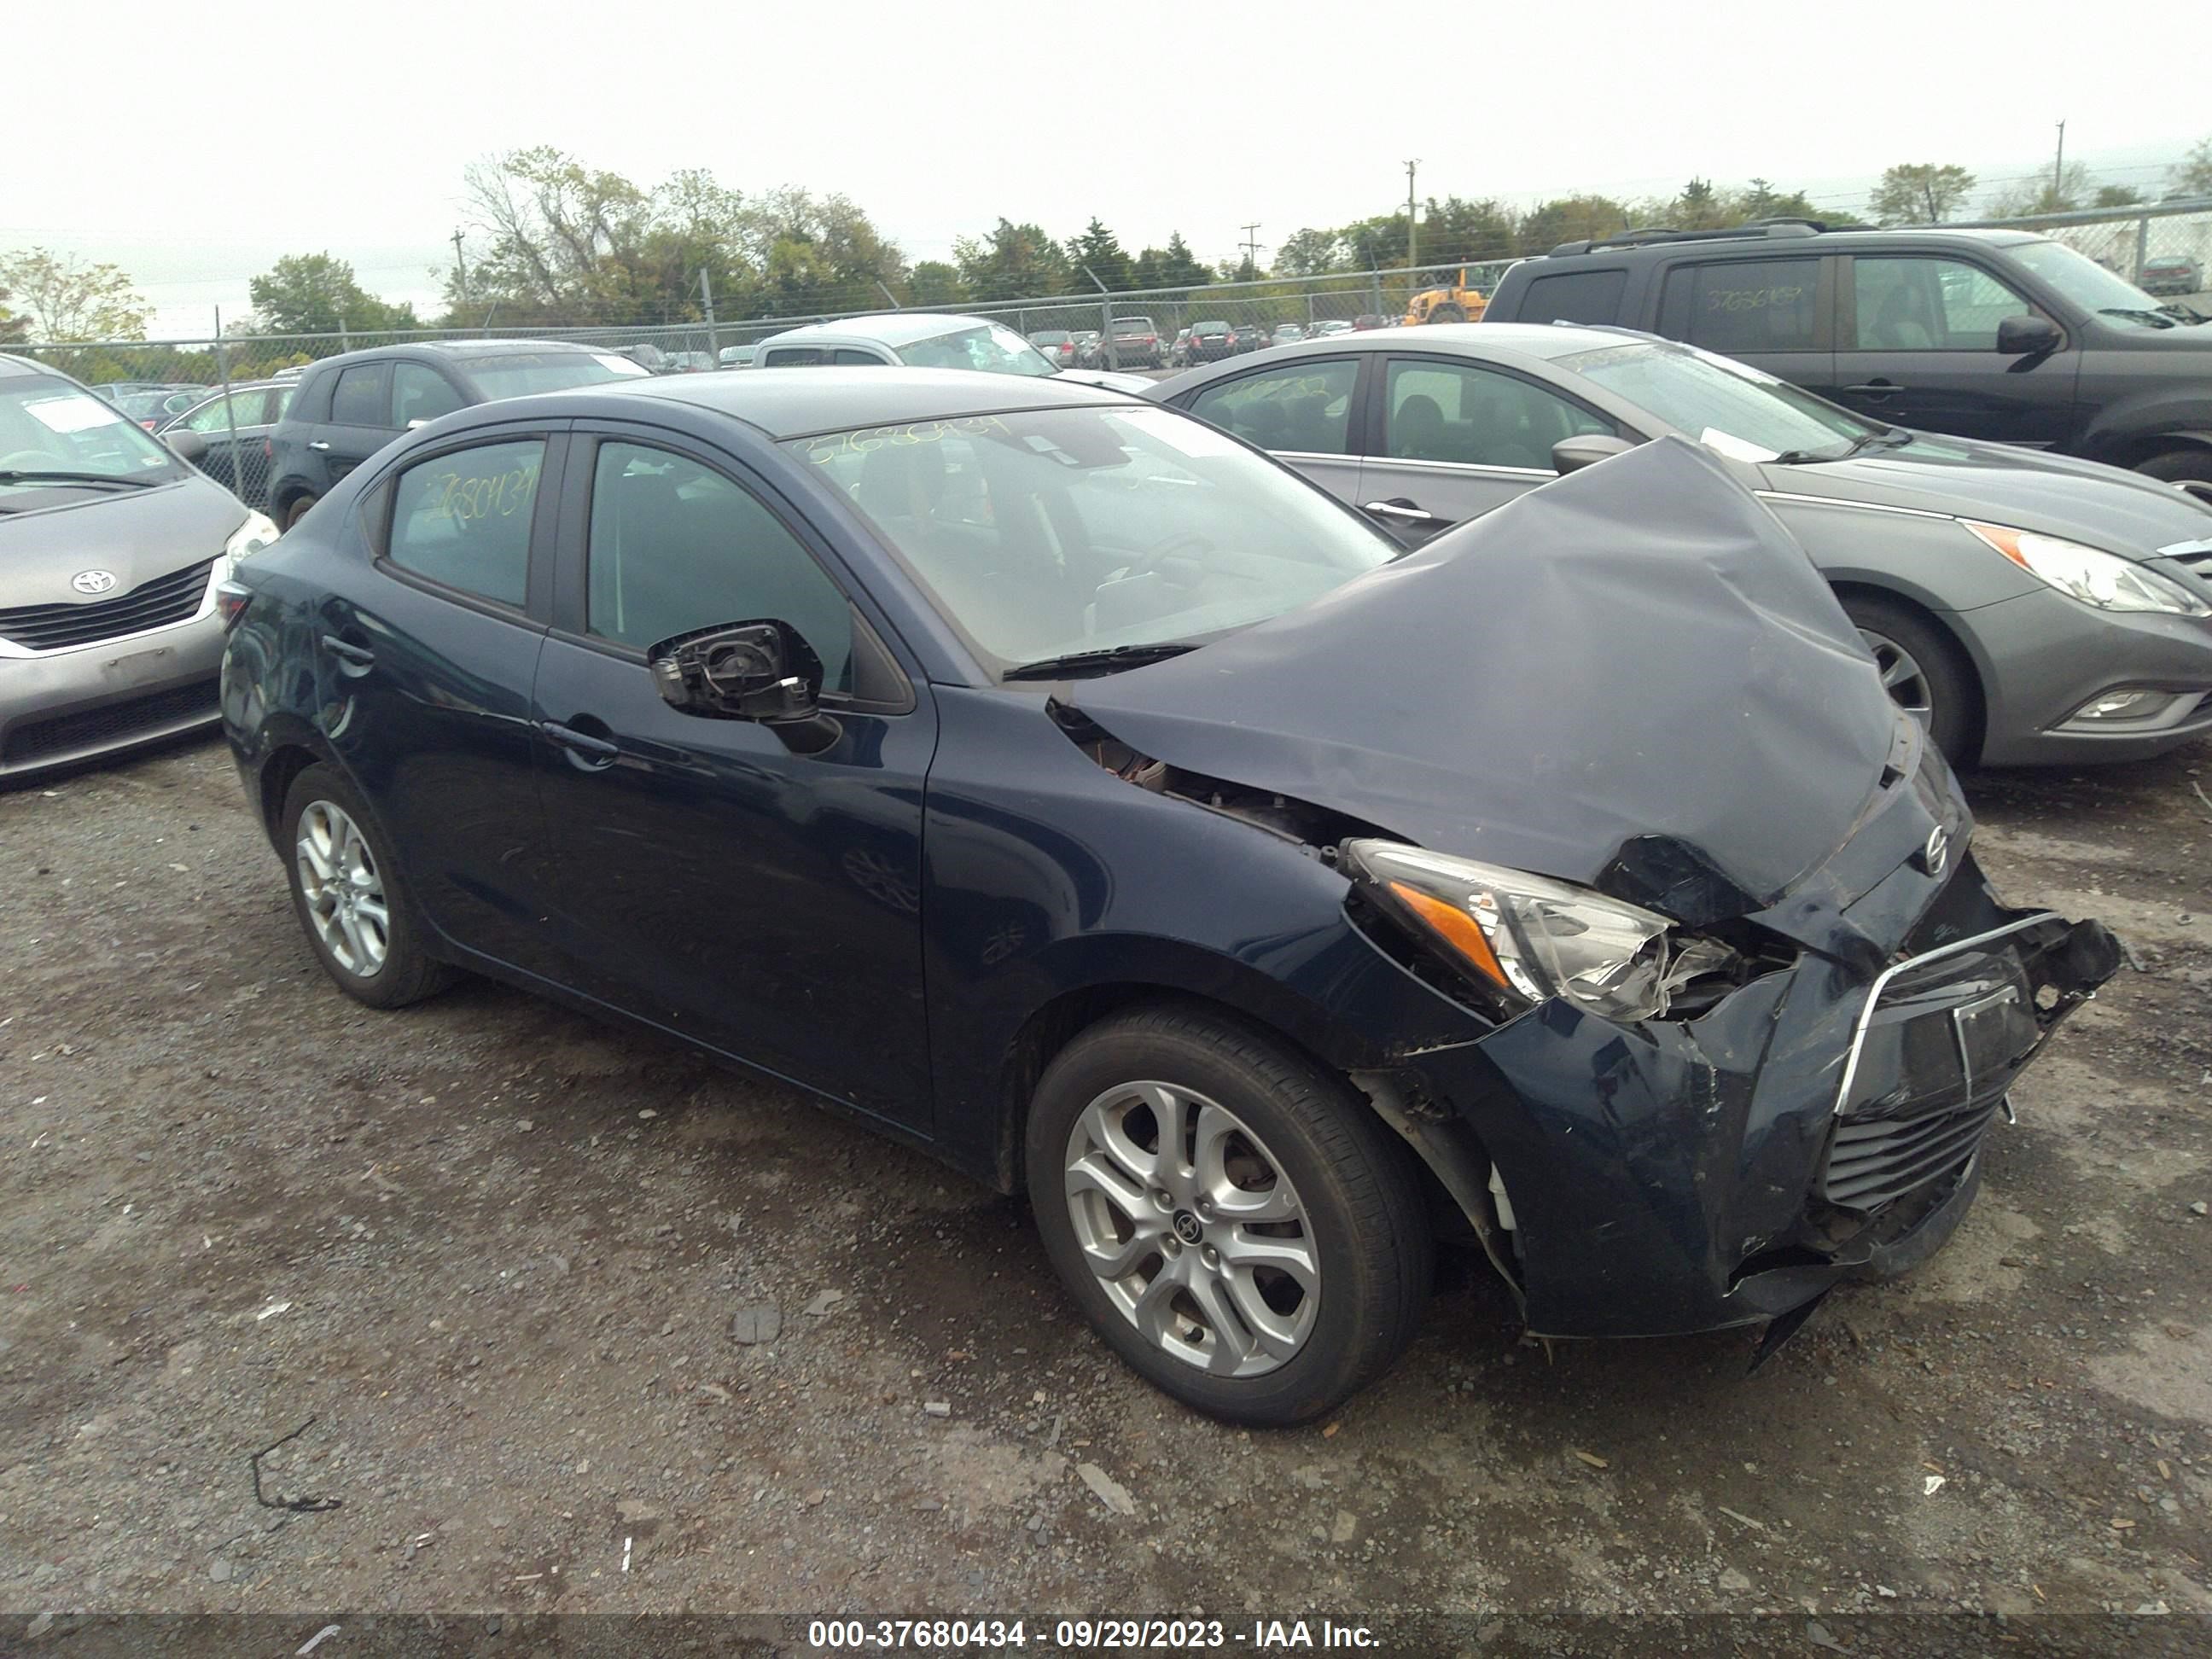 vin: 3MYDLBZV8GY100593 3MYDLBZV8GY100593 2016 scion ia 1500 for Sale in 22701, 15201 Review Rd, Culpeper, Virginia, USA